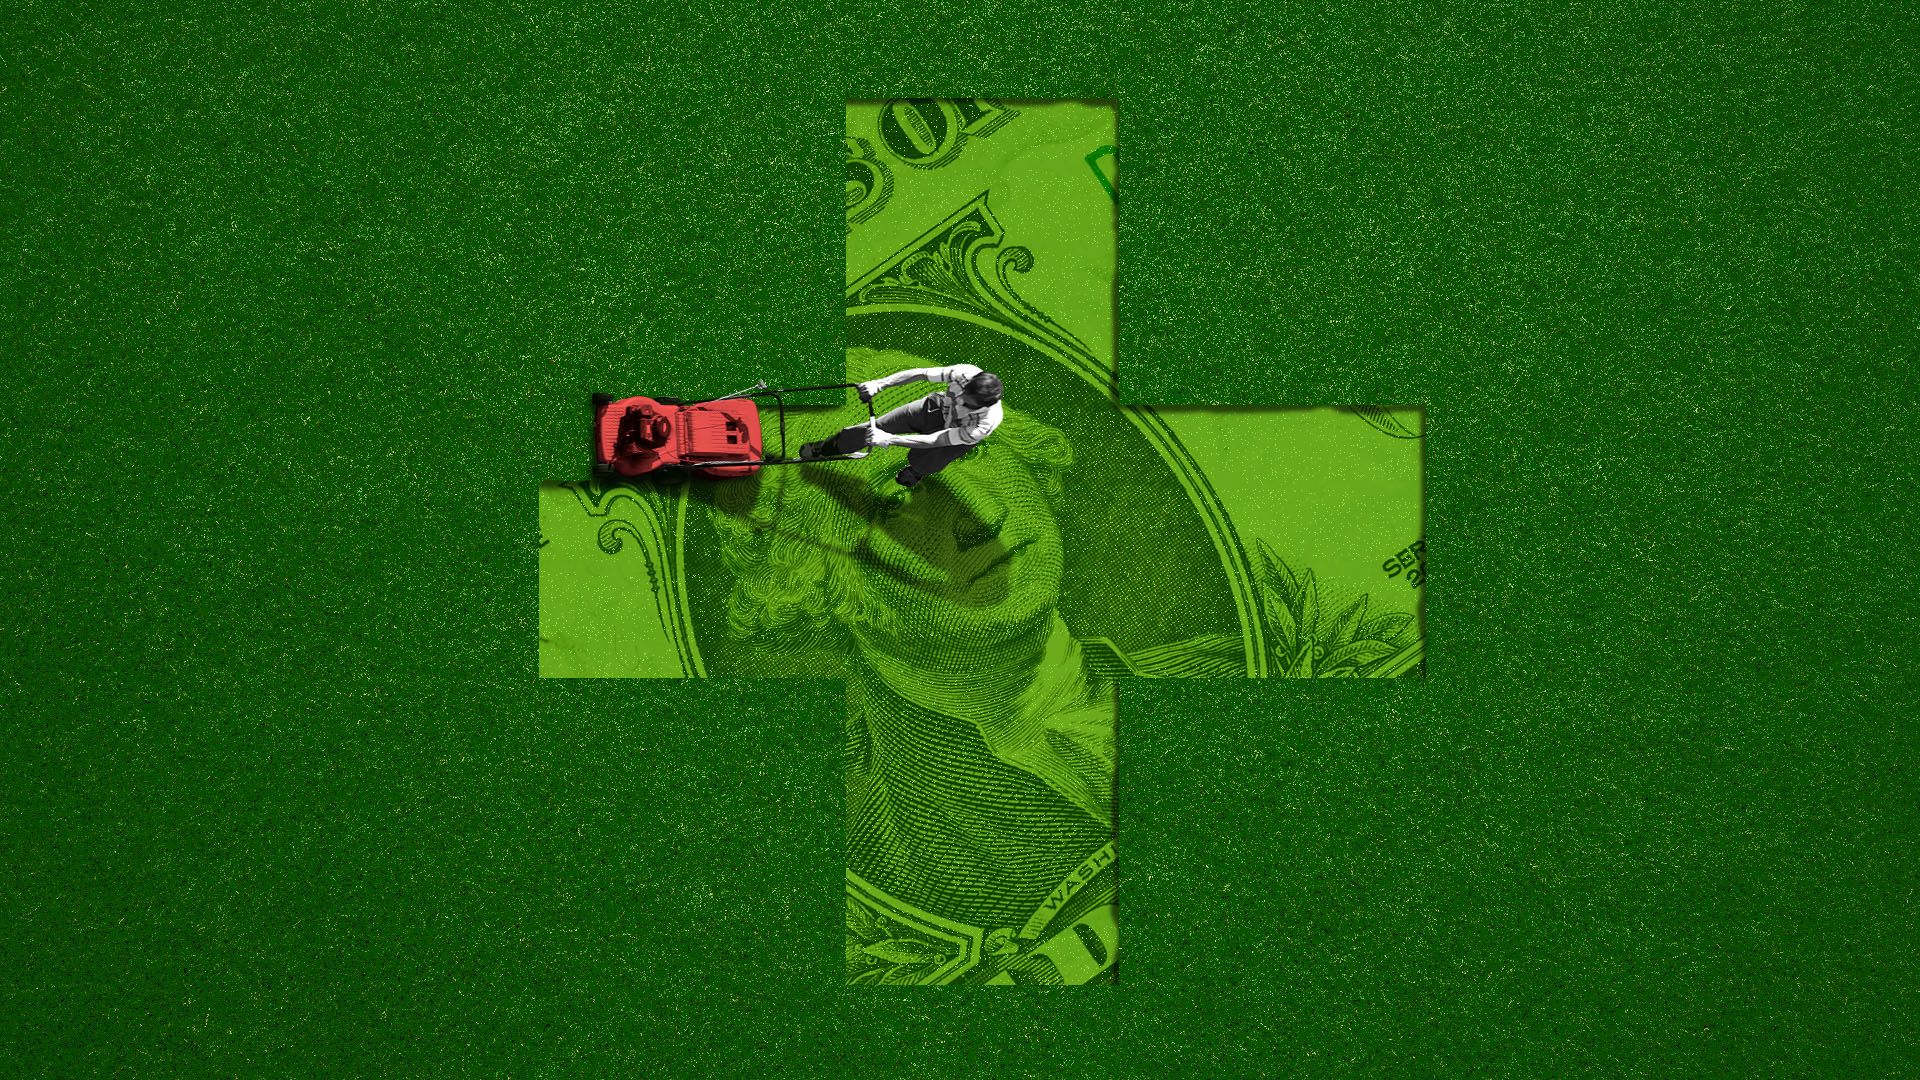 Illustration of a man mowing a lawn in the shape of a red cross, with a dollar revealed beneath